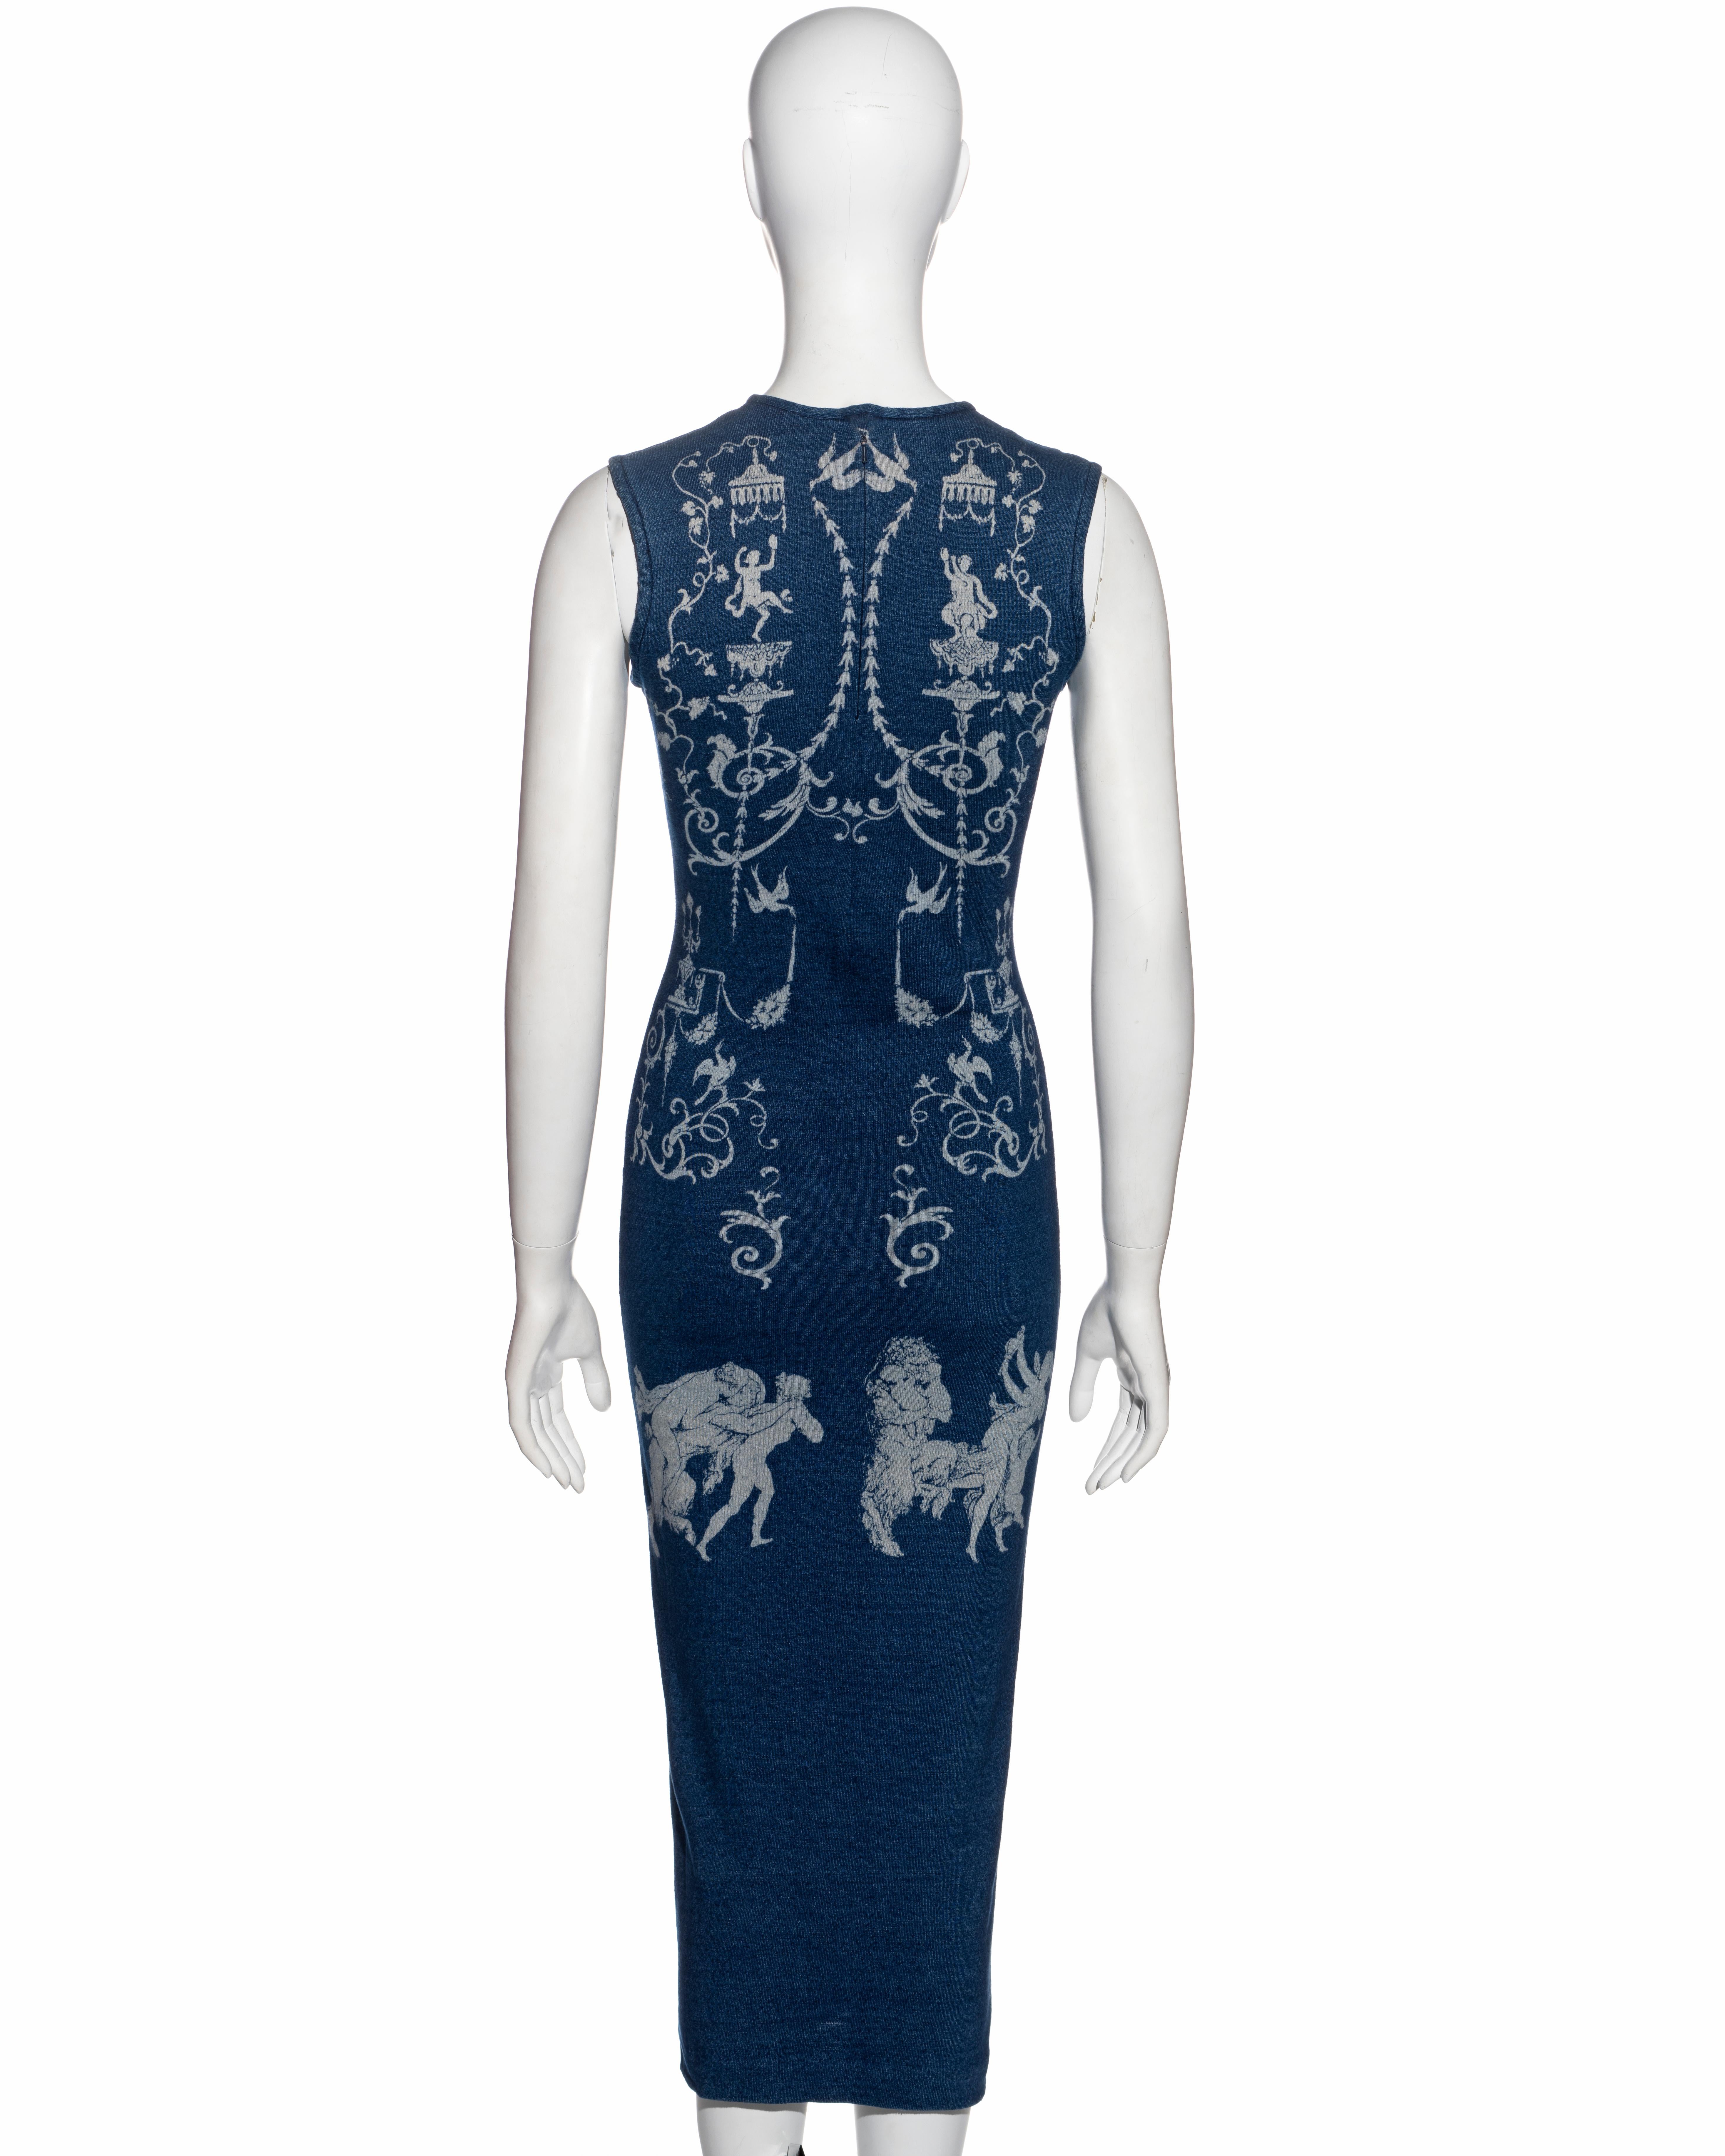 Vivienne Westwood indigo cotton jersey dress printed dress, ss 1991 In Good Condition For Sale In London, GB